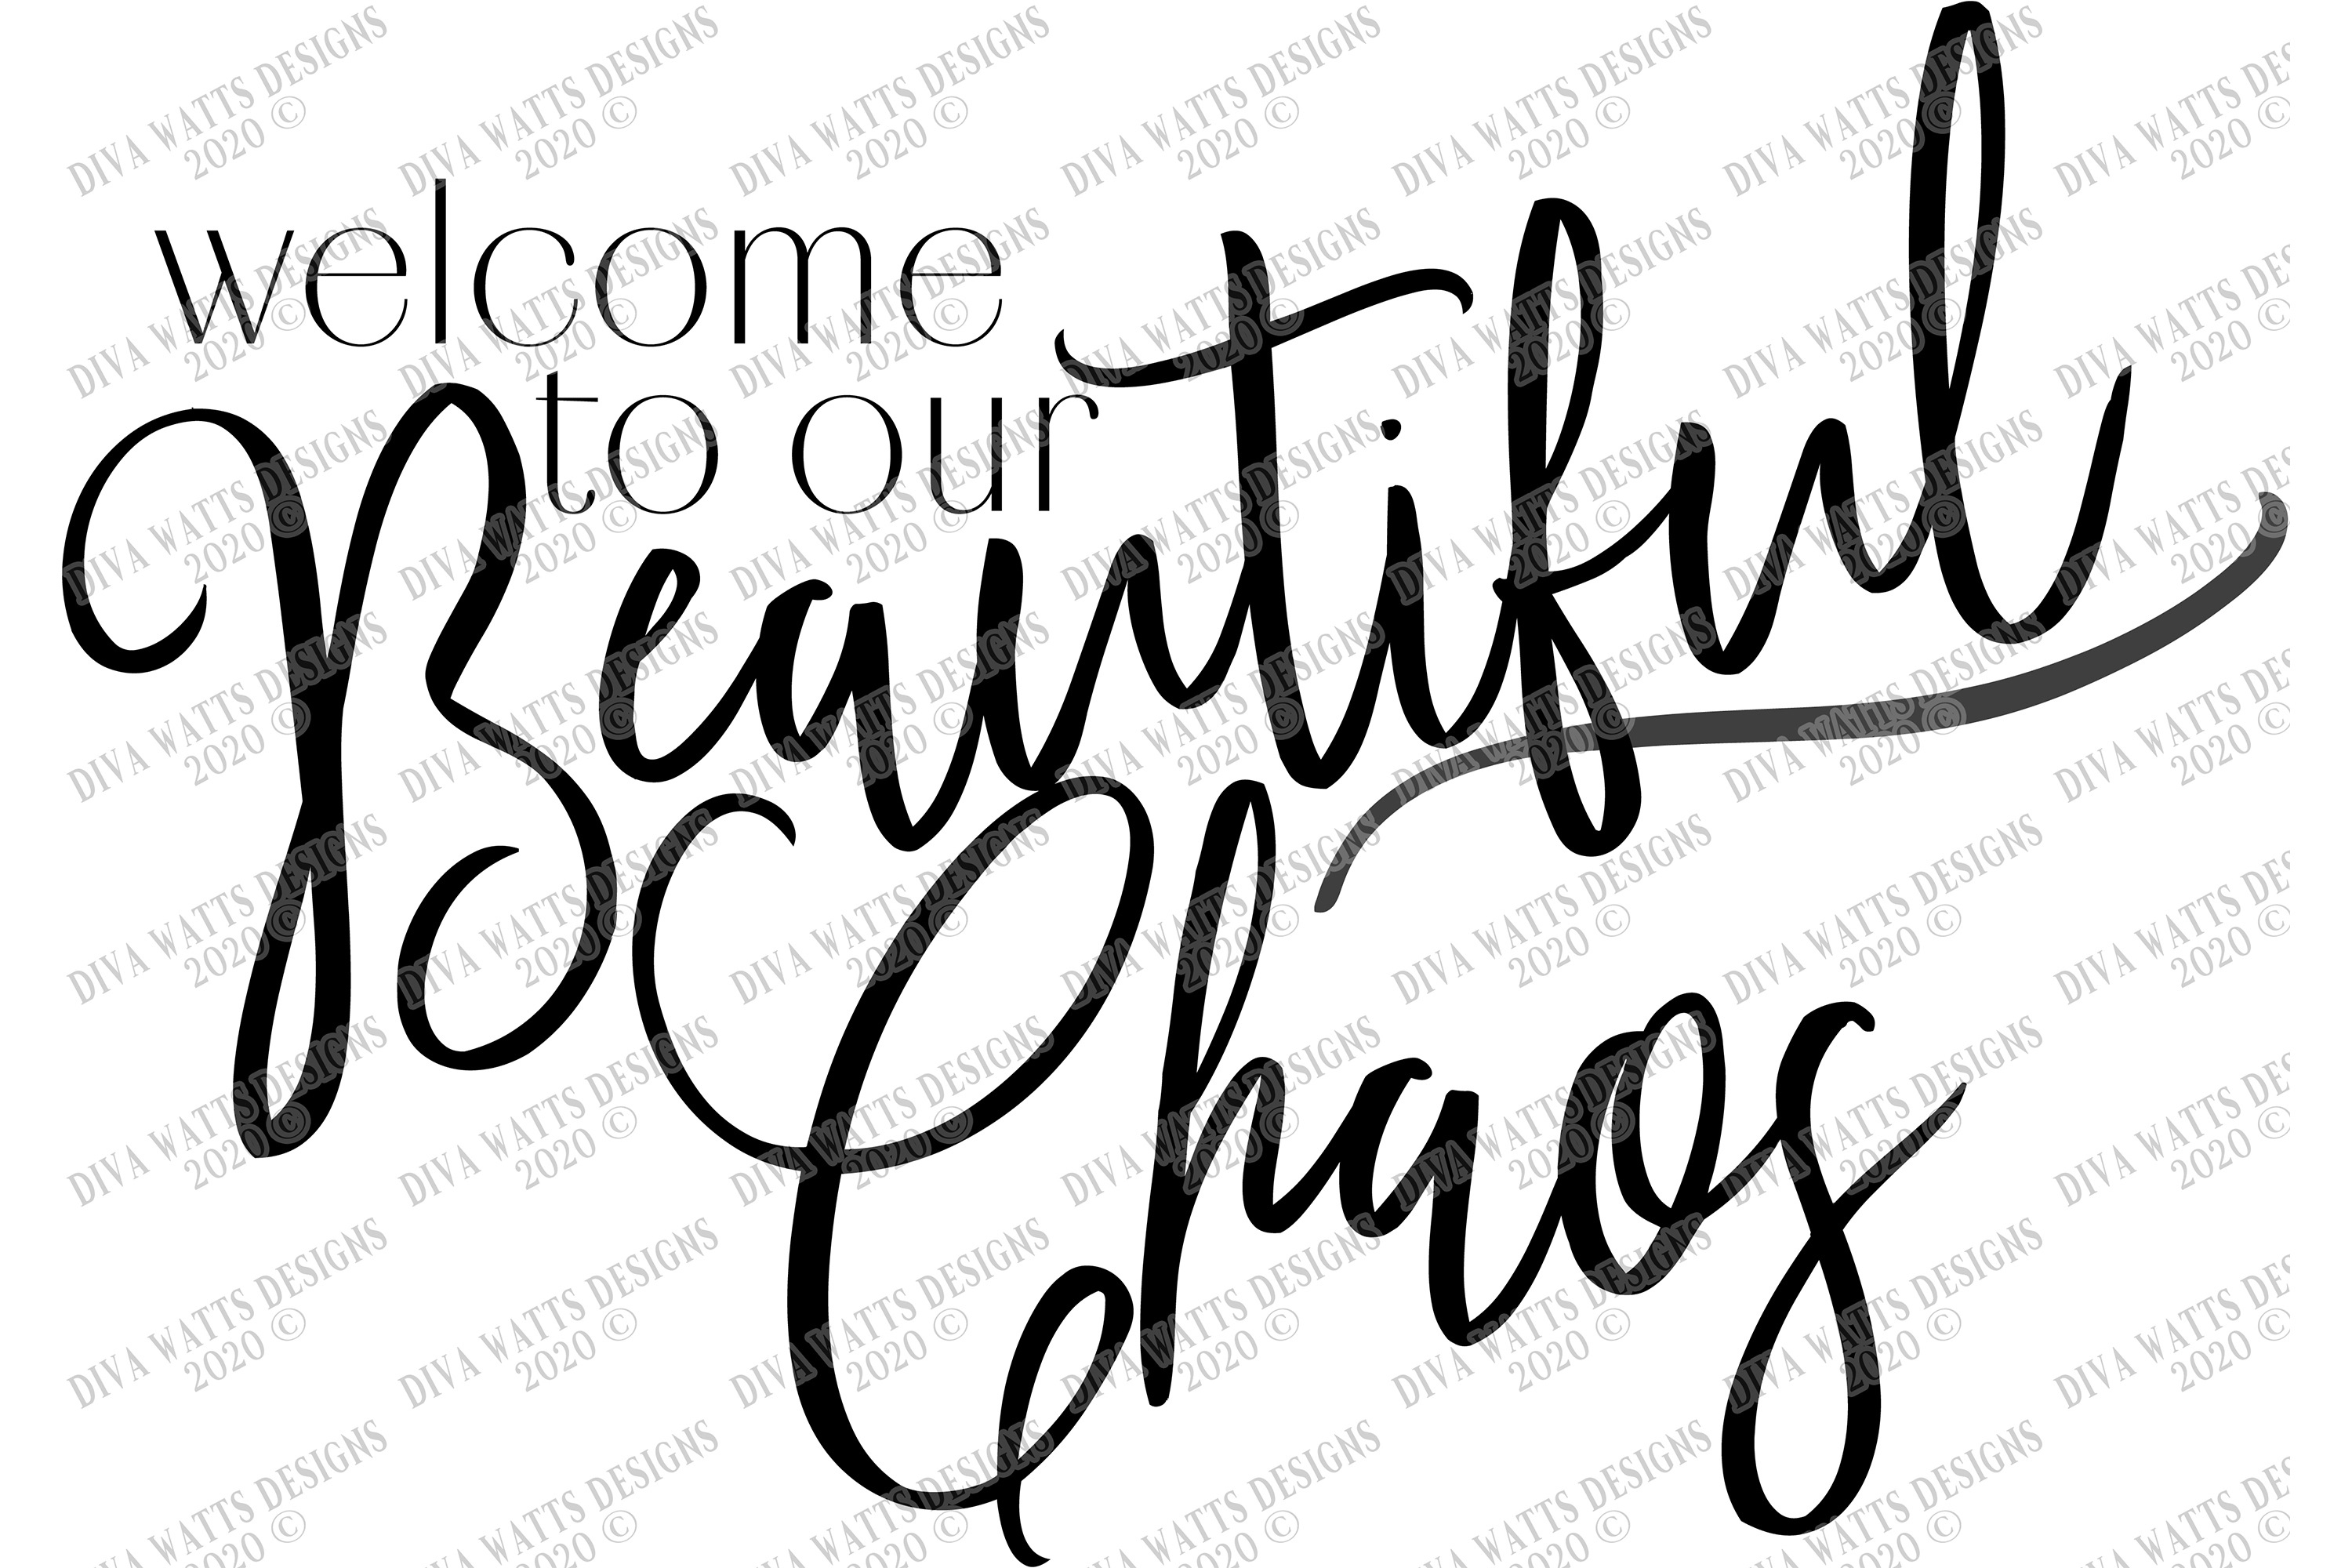 Download Welcome To Our Beautiful Chaos - Family Sign SVG EPS JPG